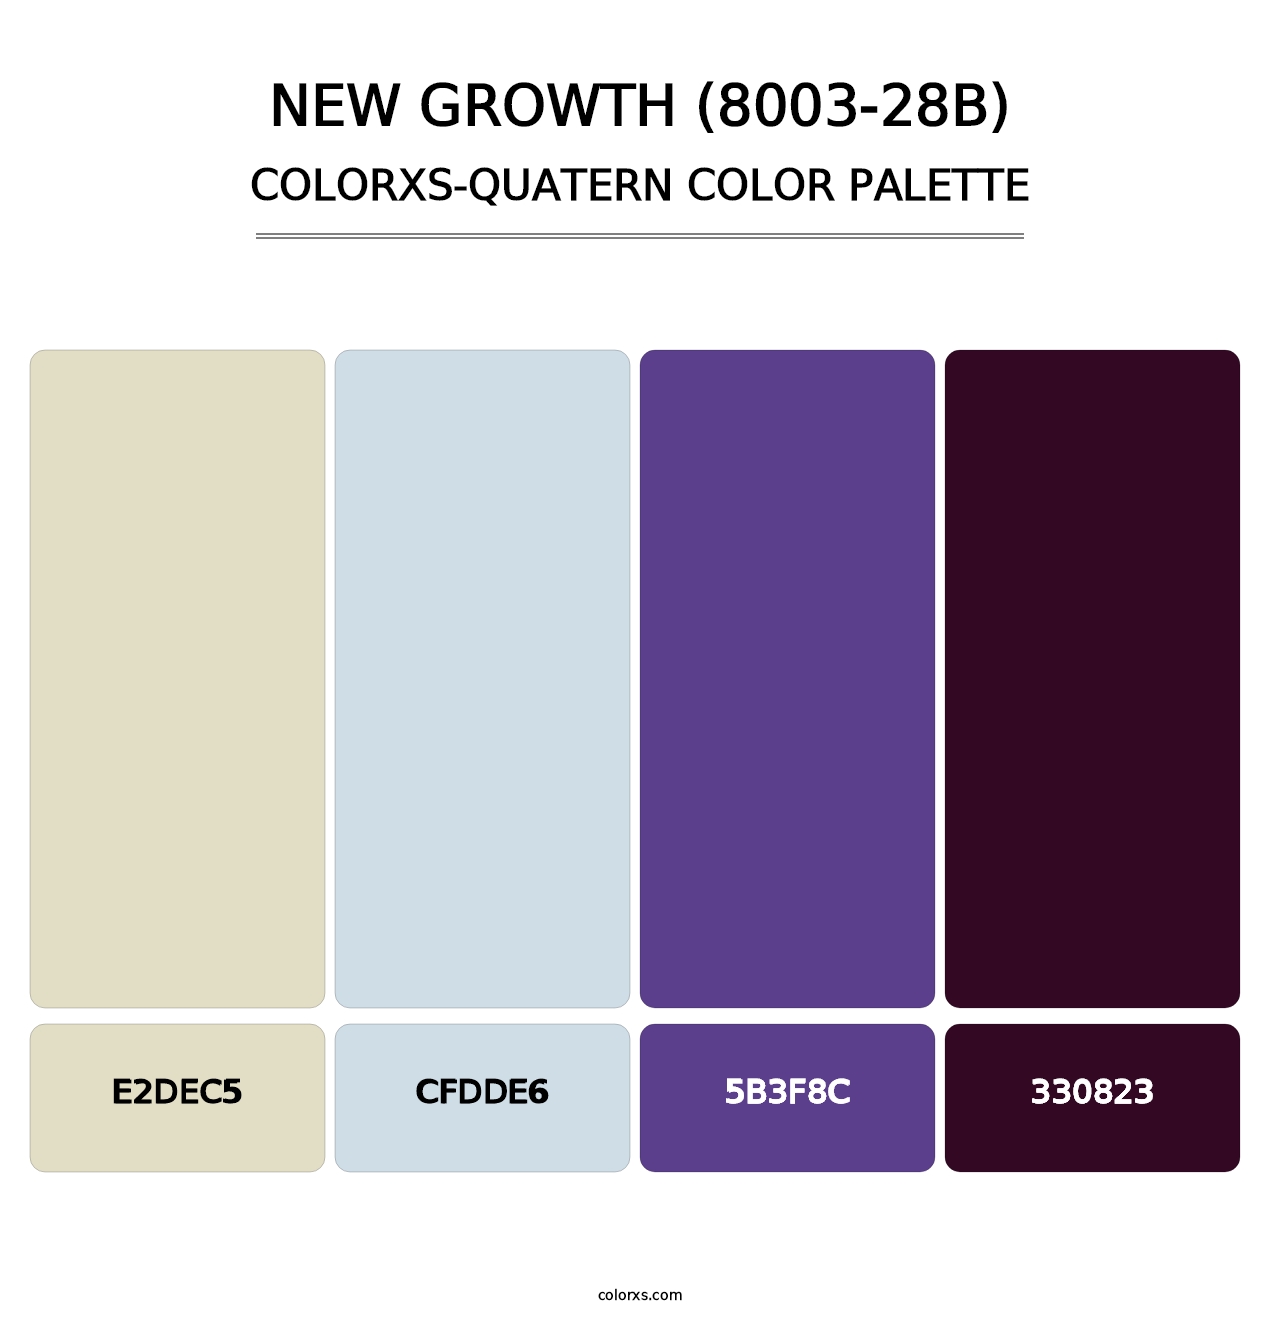 New Growth (8003-28B) - Colorxs Quatern Palette